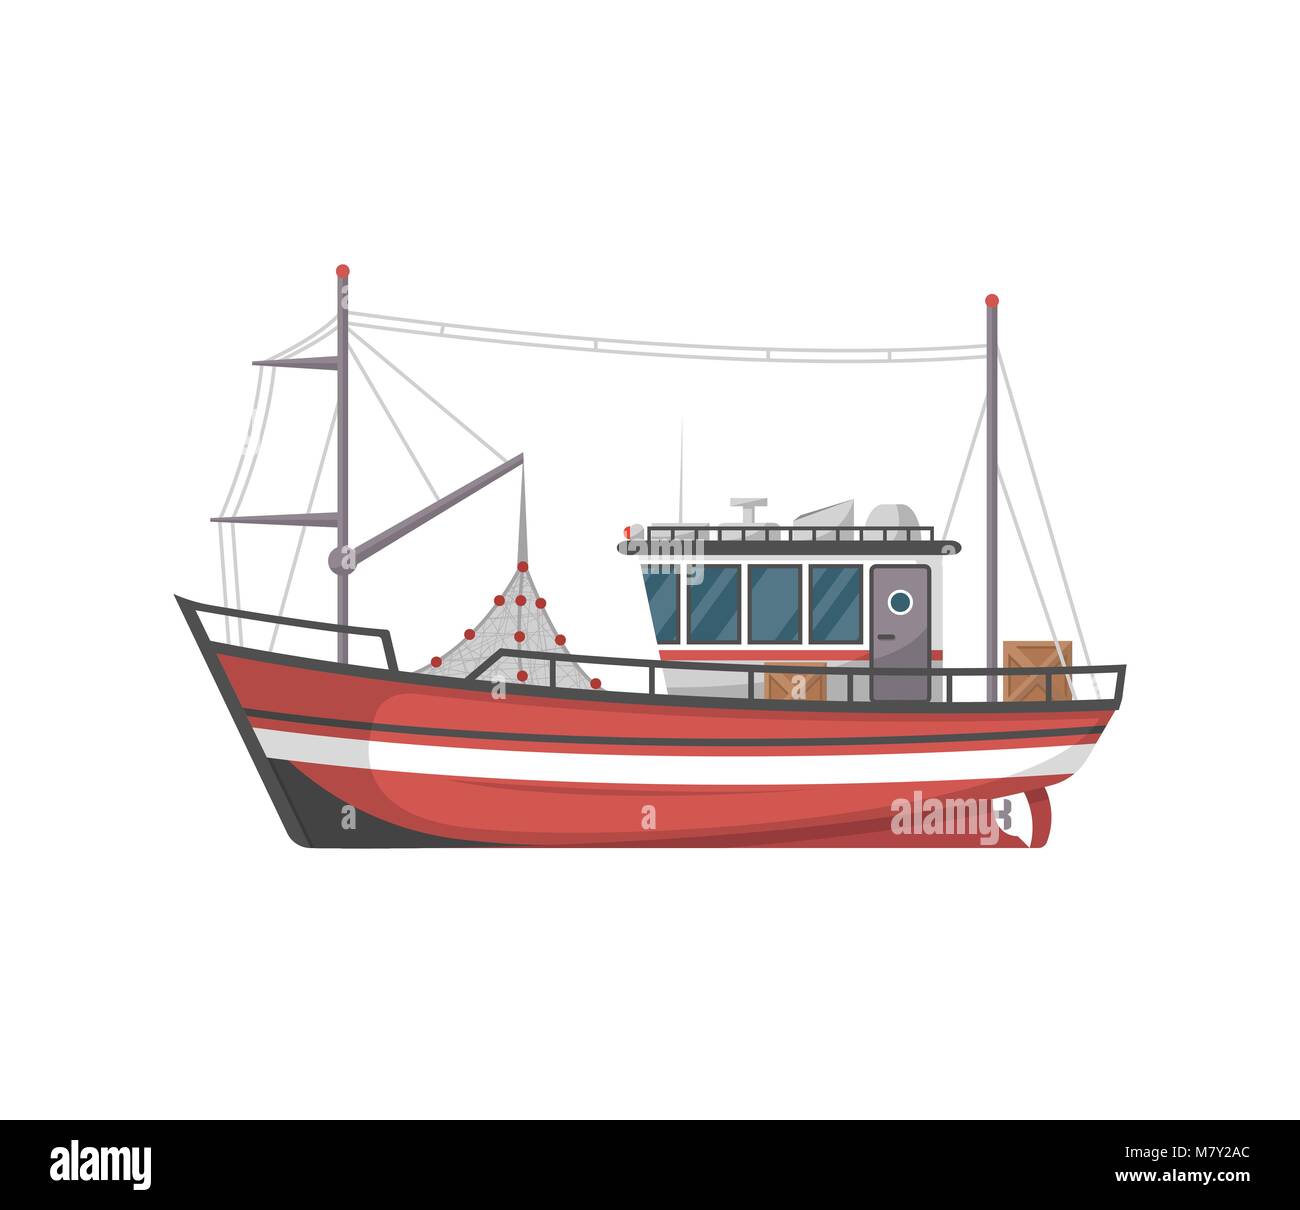 Fishing boat landing catch Stock Vector Images - Alamy